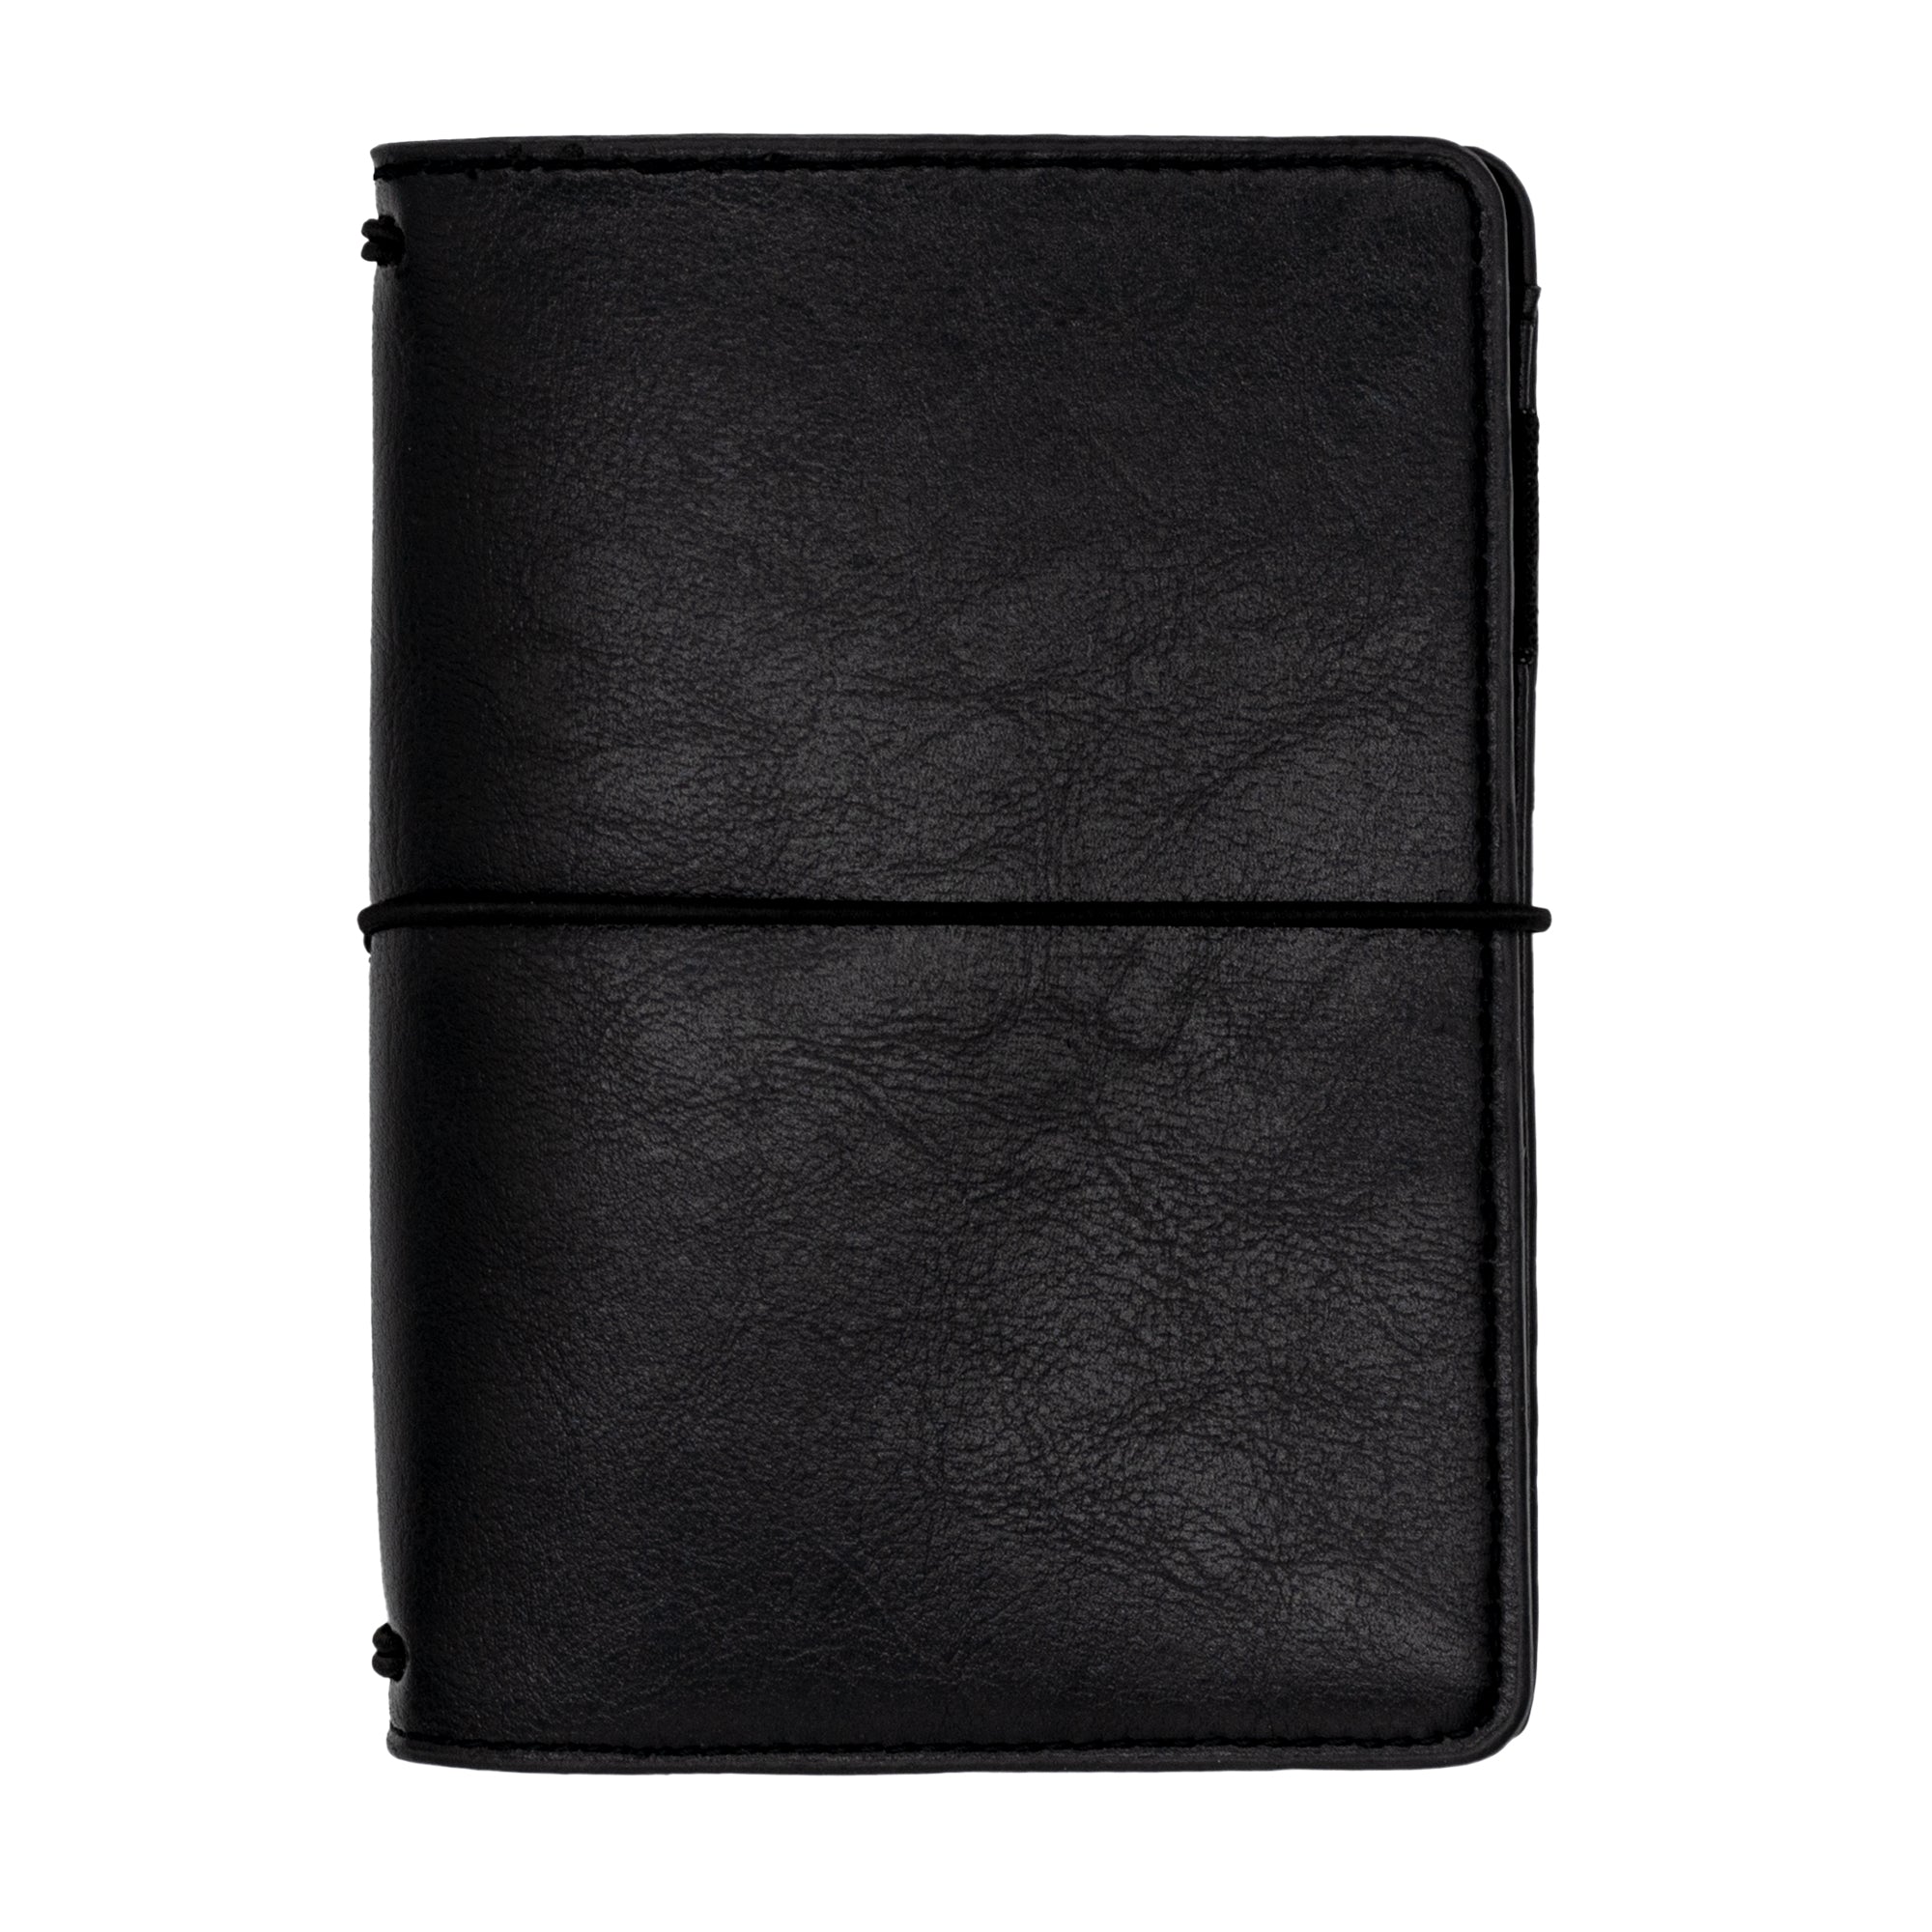  Do What you Love Passport Holder eco leather cover